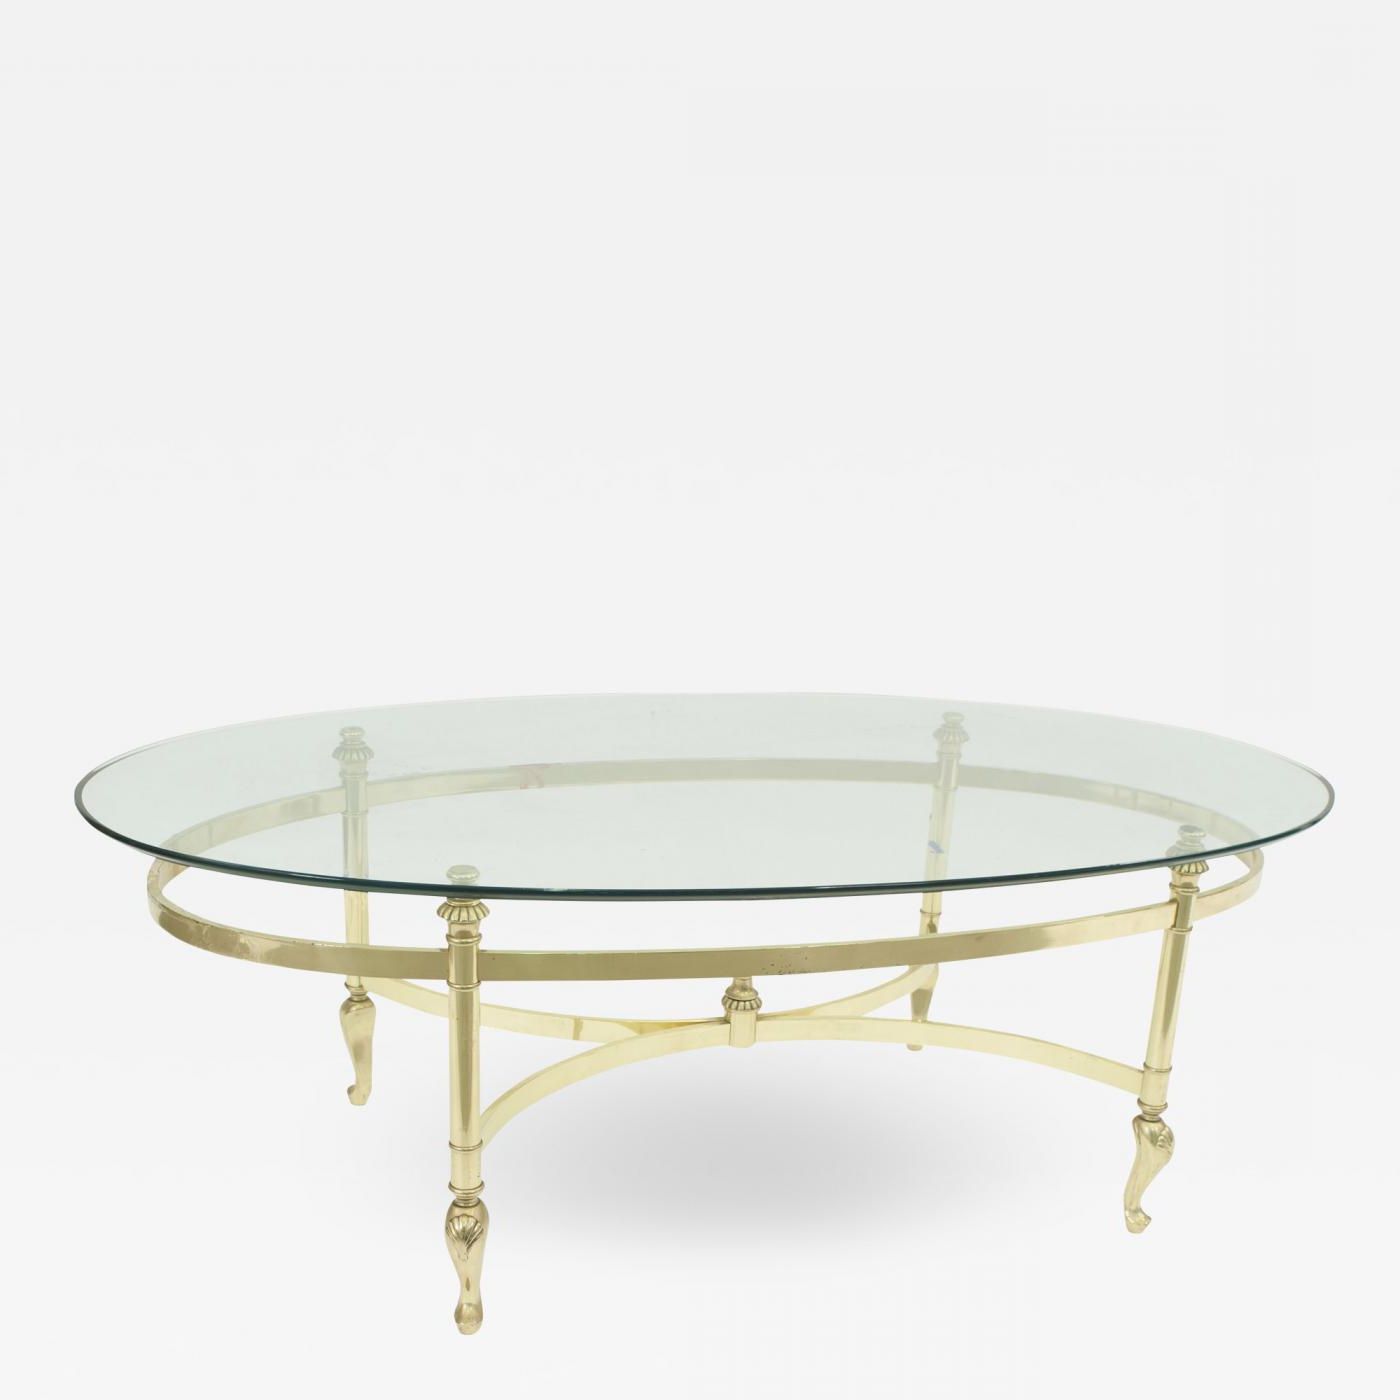 Contemporary Oval Brass And Glass Coffee Table Intended For Famous Glass And Gold Oval Coffee Tables (View 15 of 20)